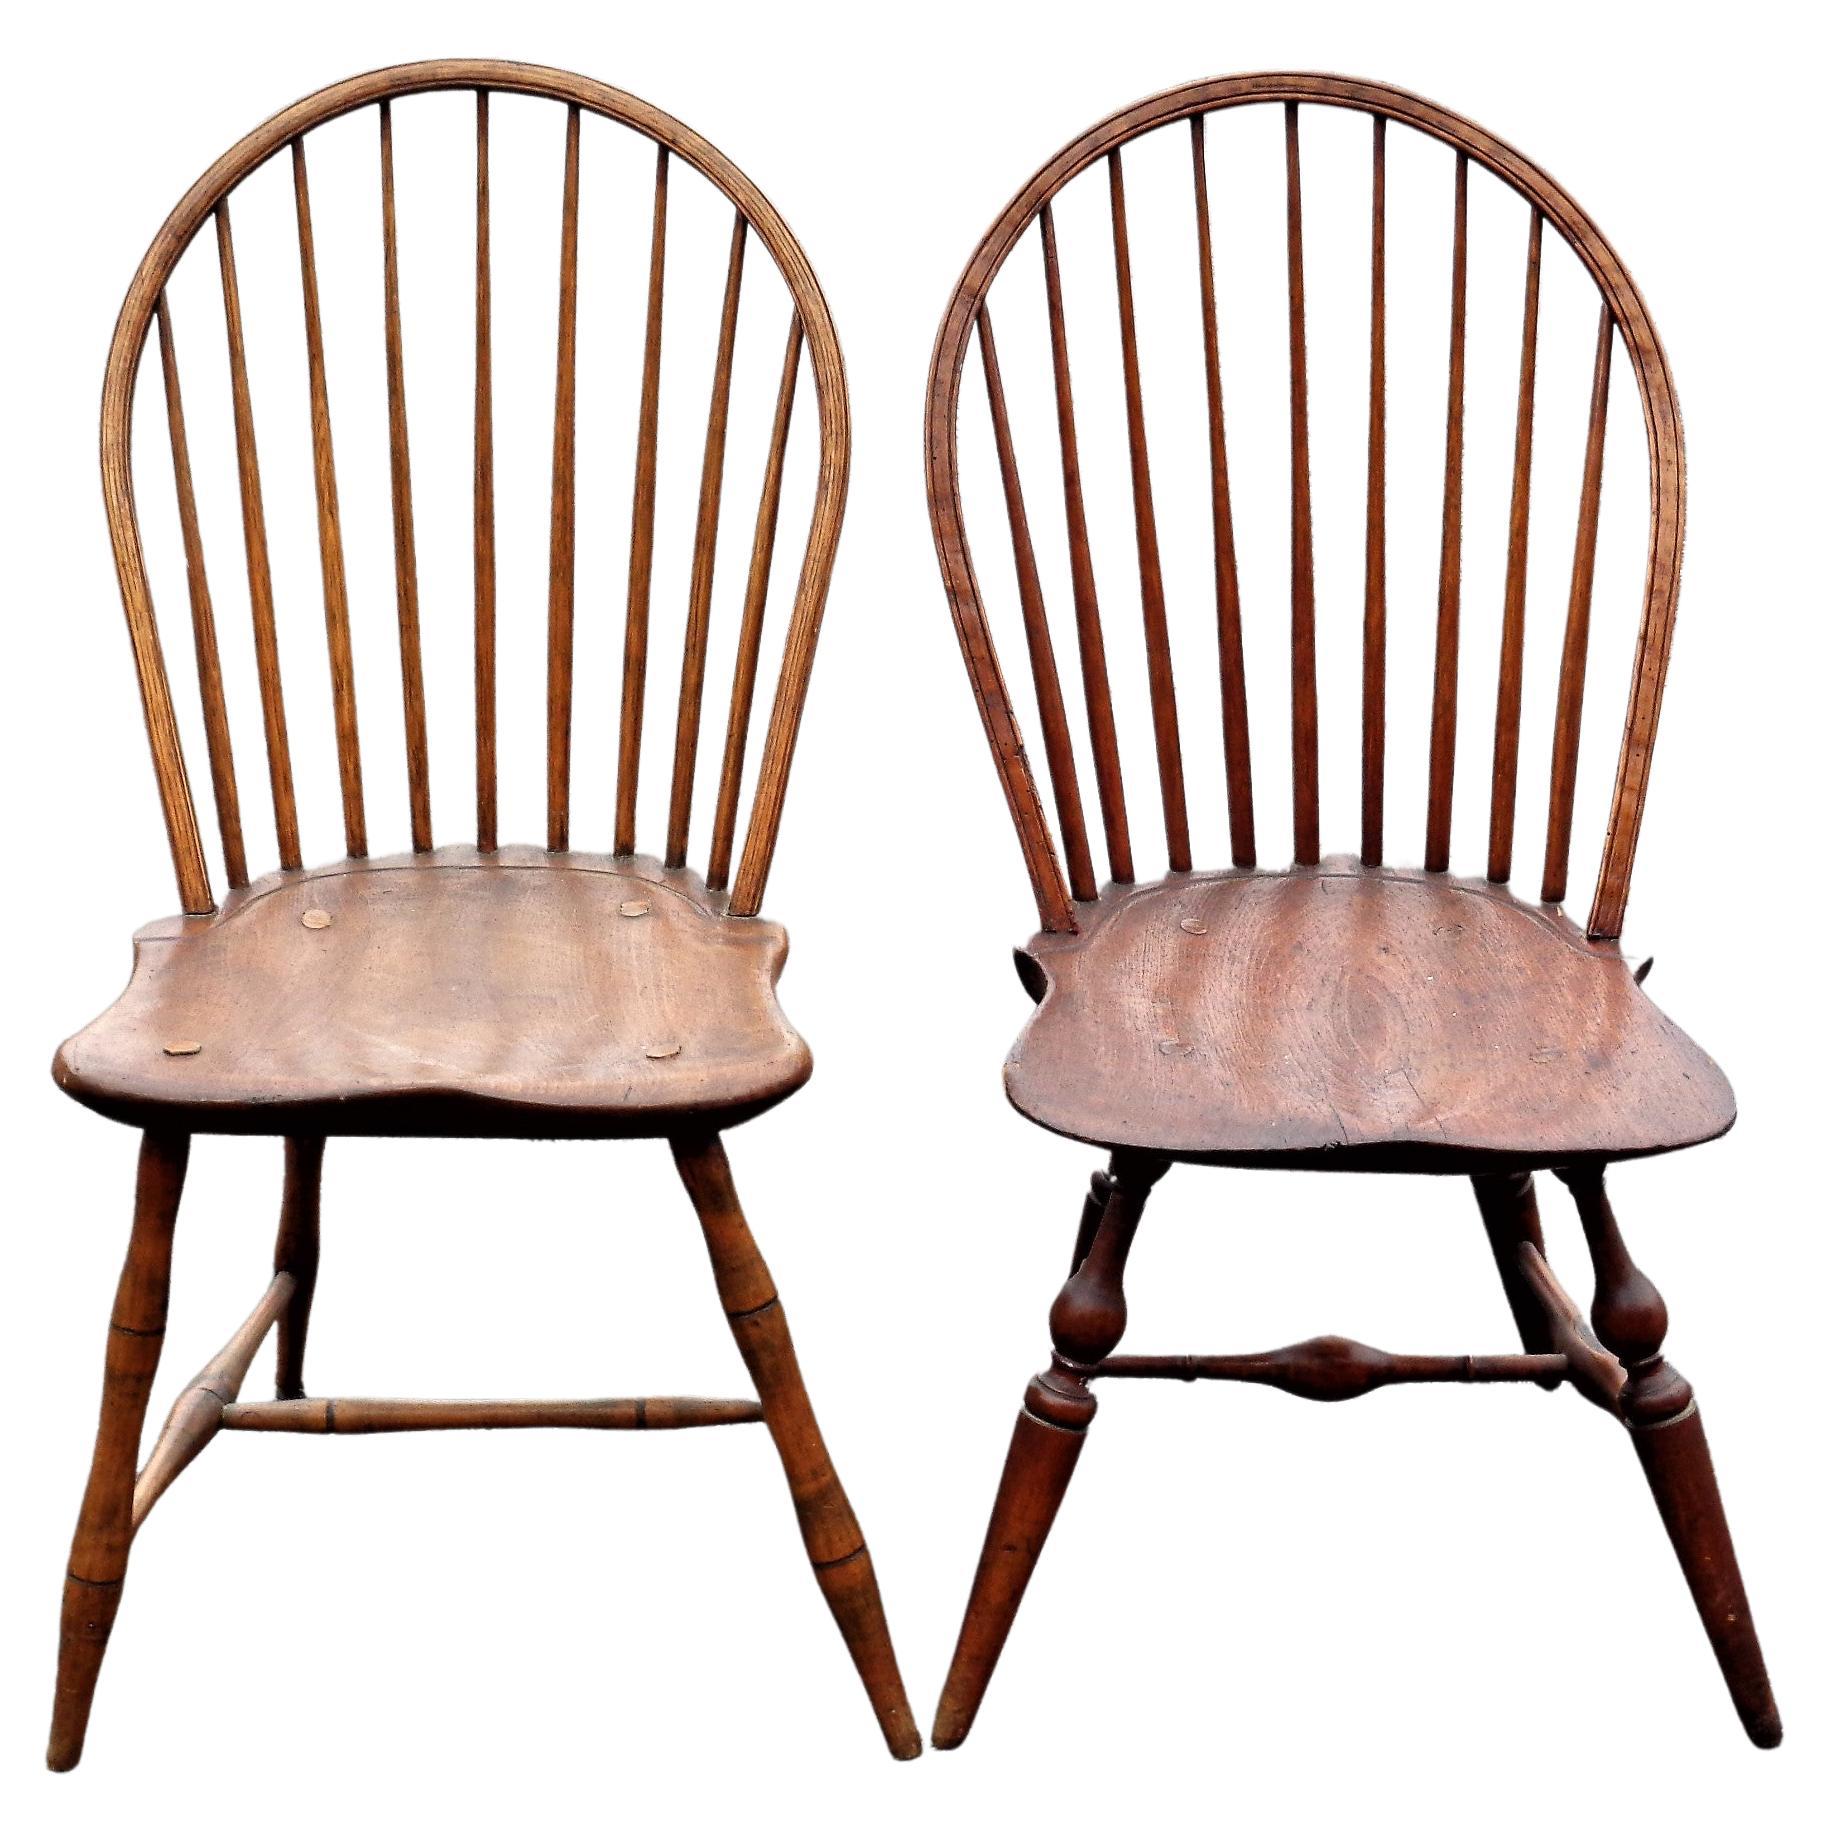  18th Century American Bow Back Windsor Chairs 7